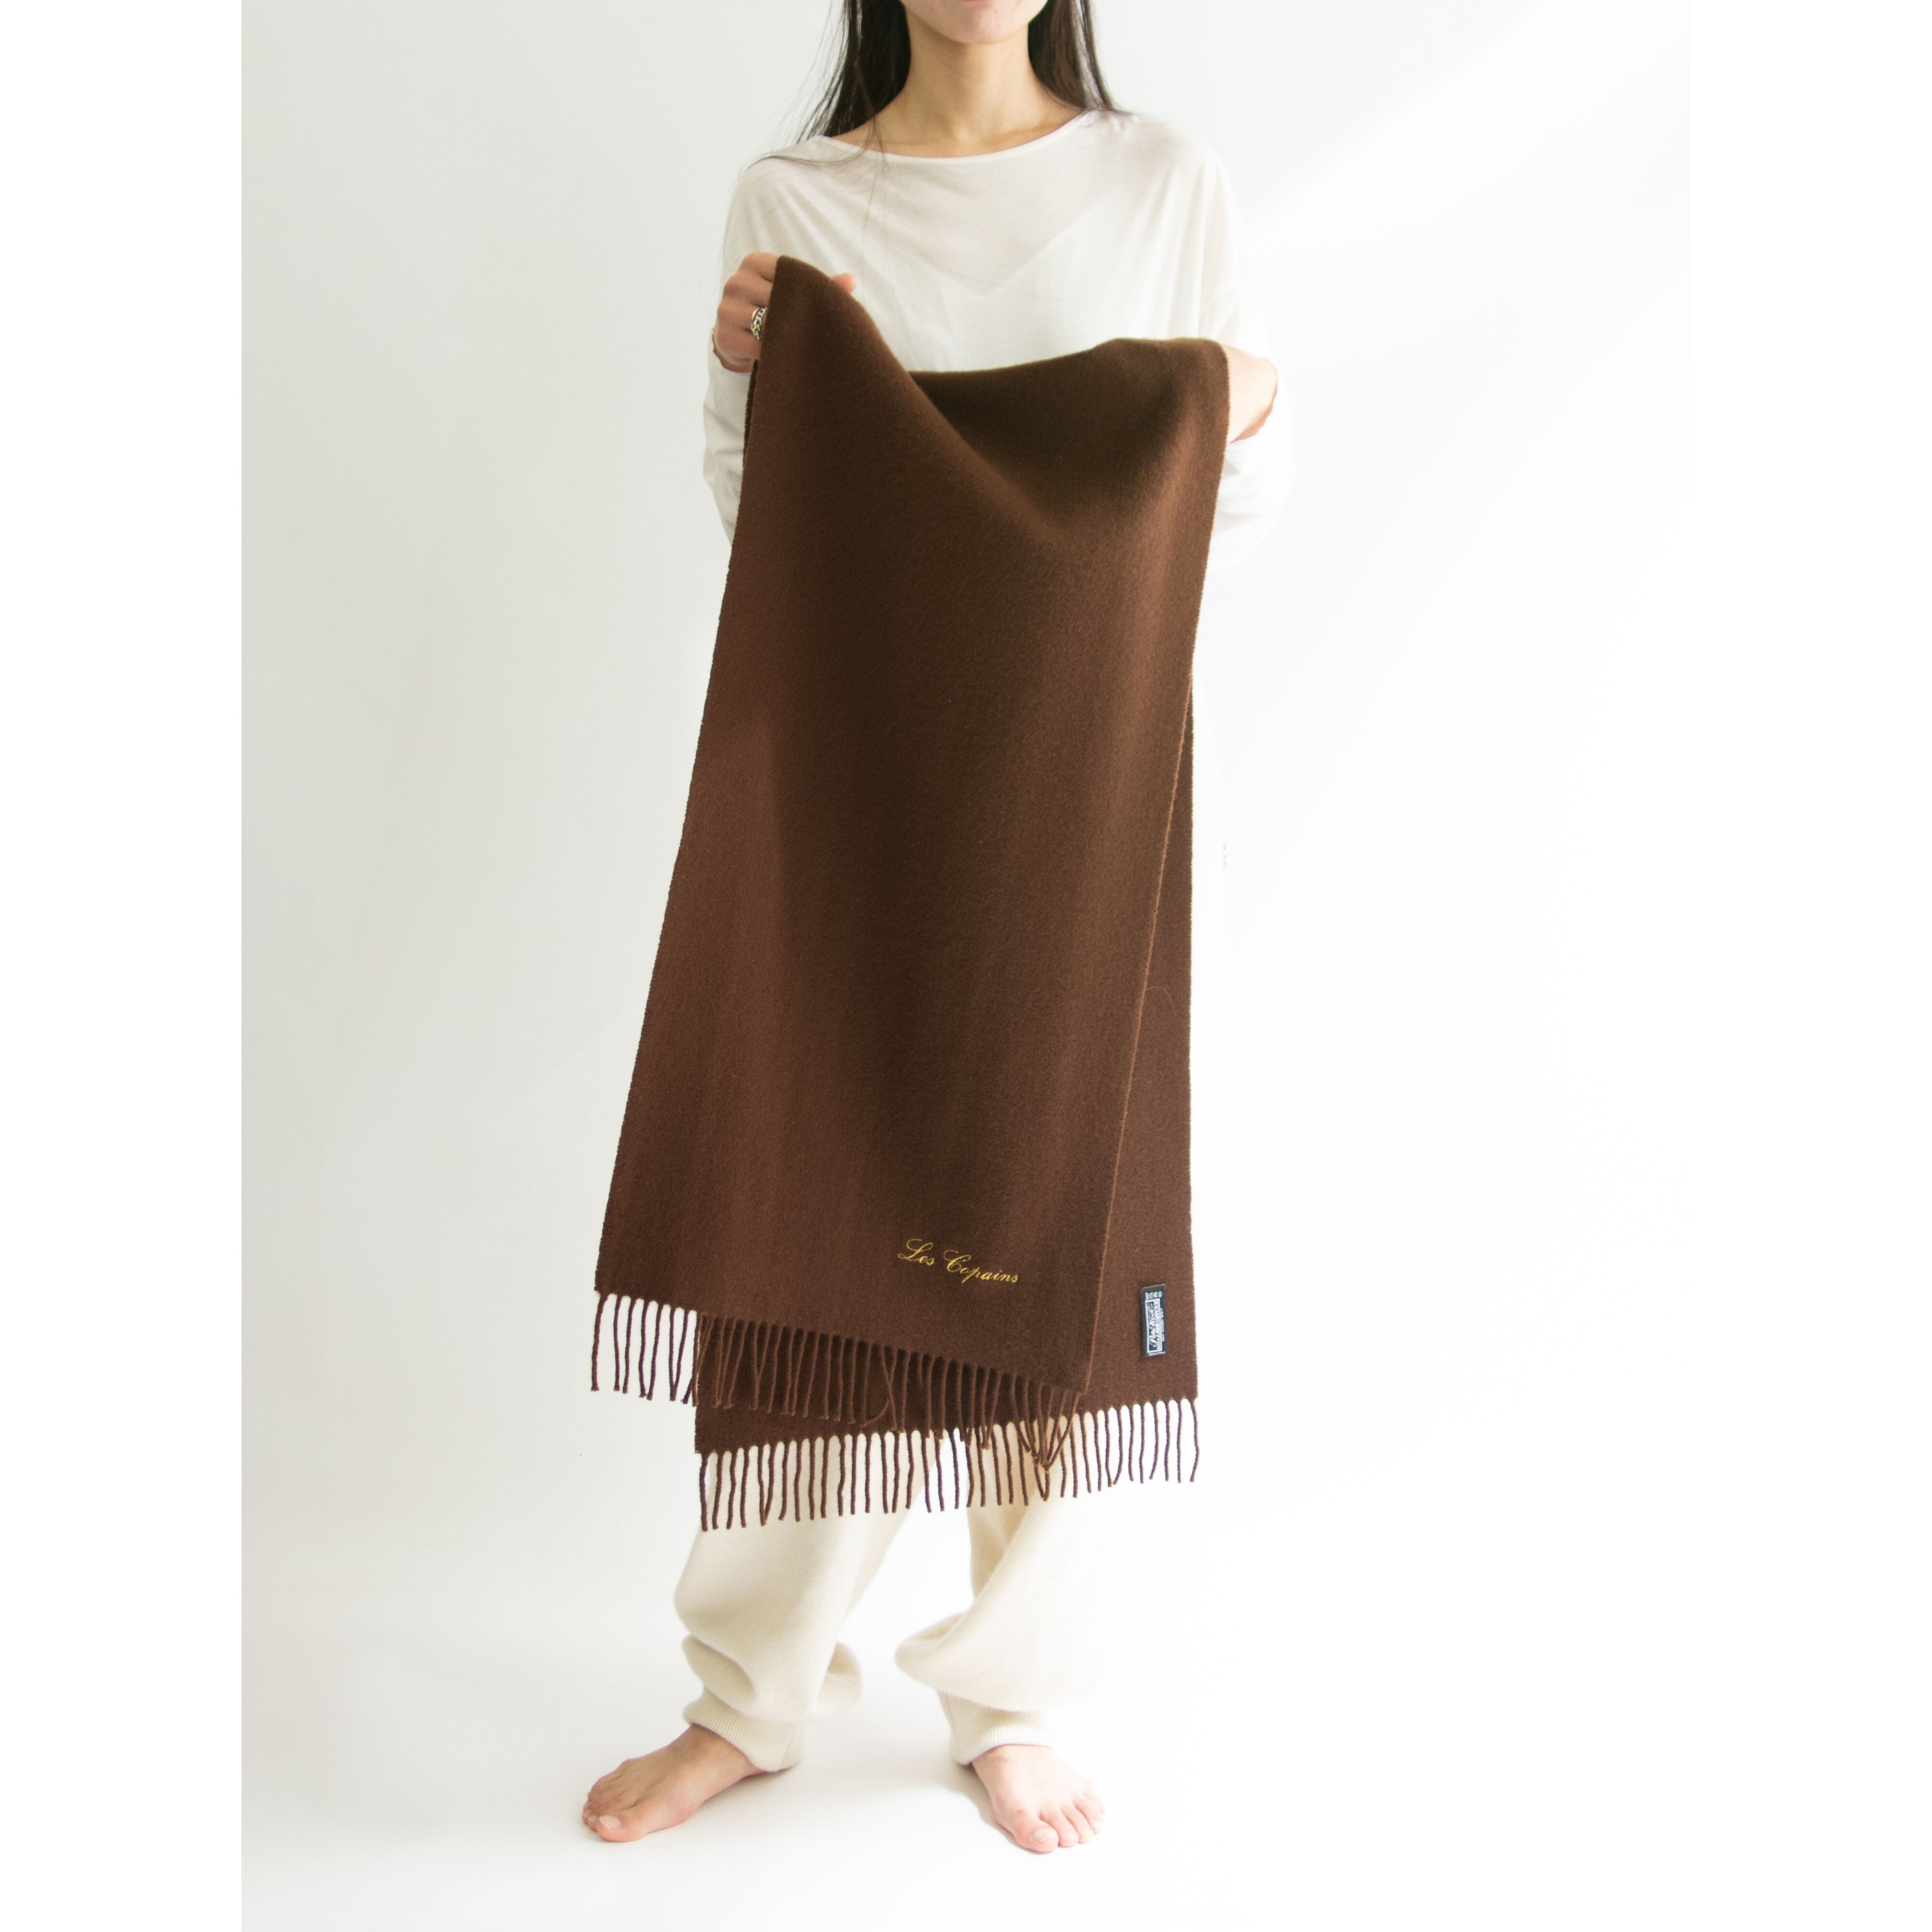 Les Copains】Made in Italy 100% Lambswool Fringe Scarf（レコパン ...